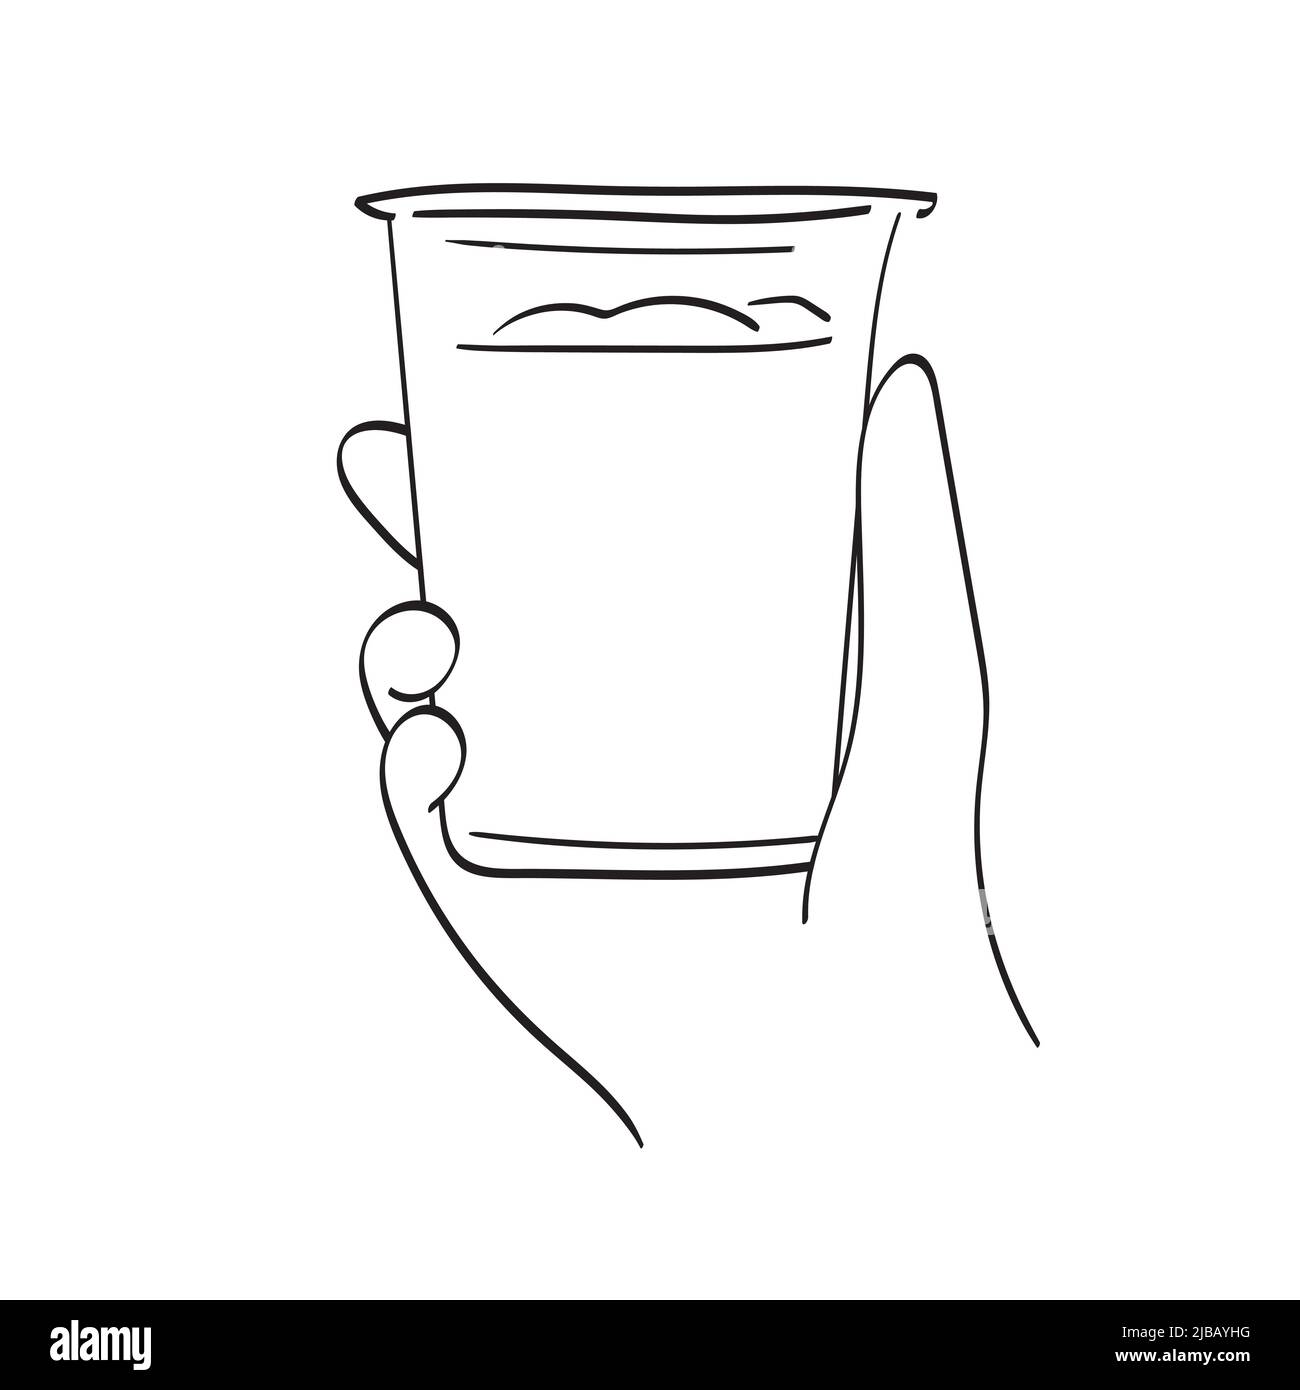 closeup hand holding iced coffee illustration vector hand drawn isolated on white background line art. Stock Vector